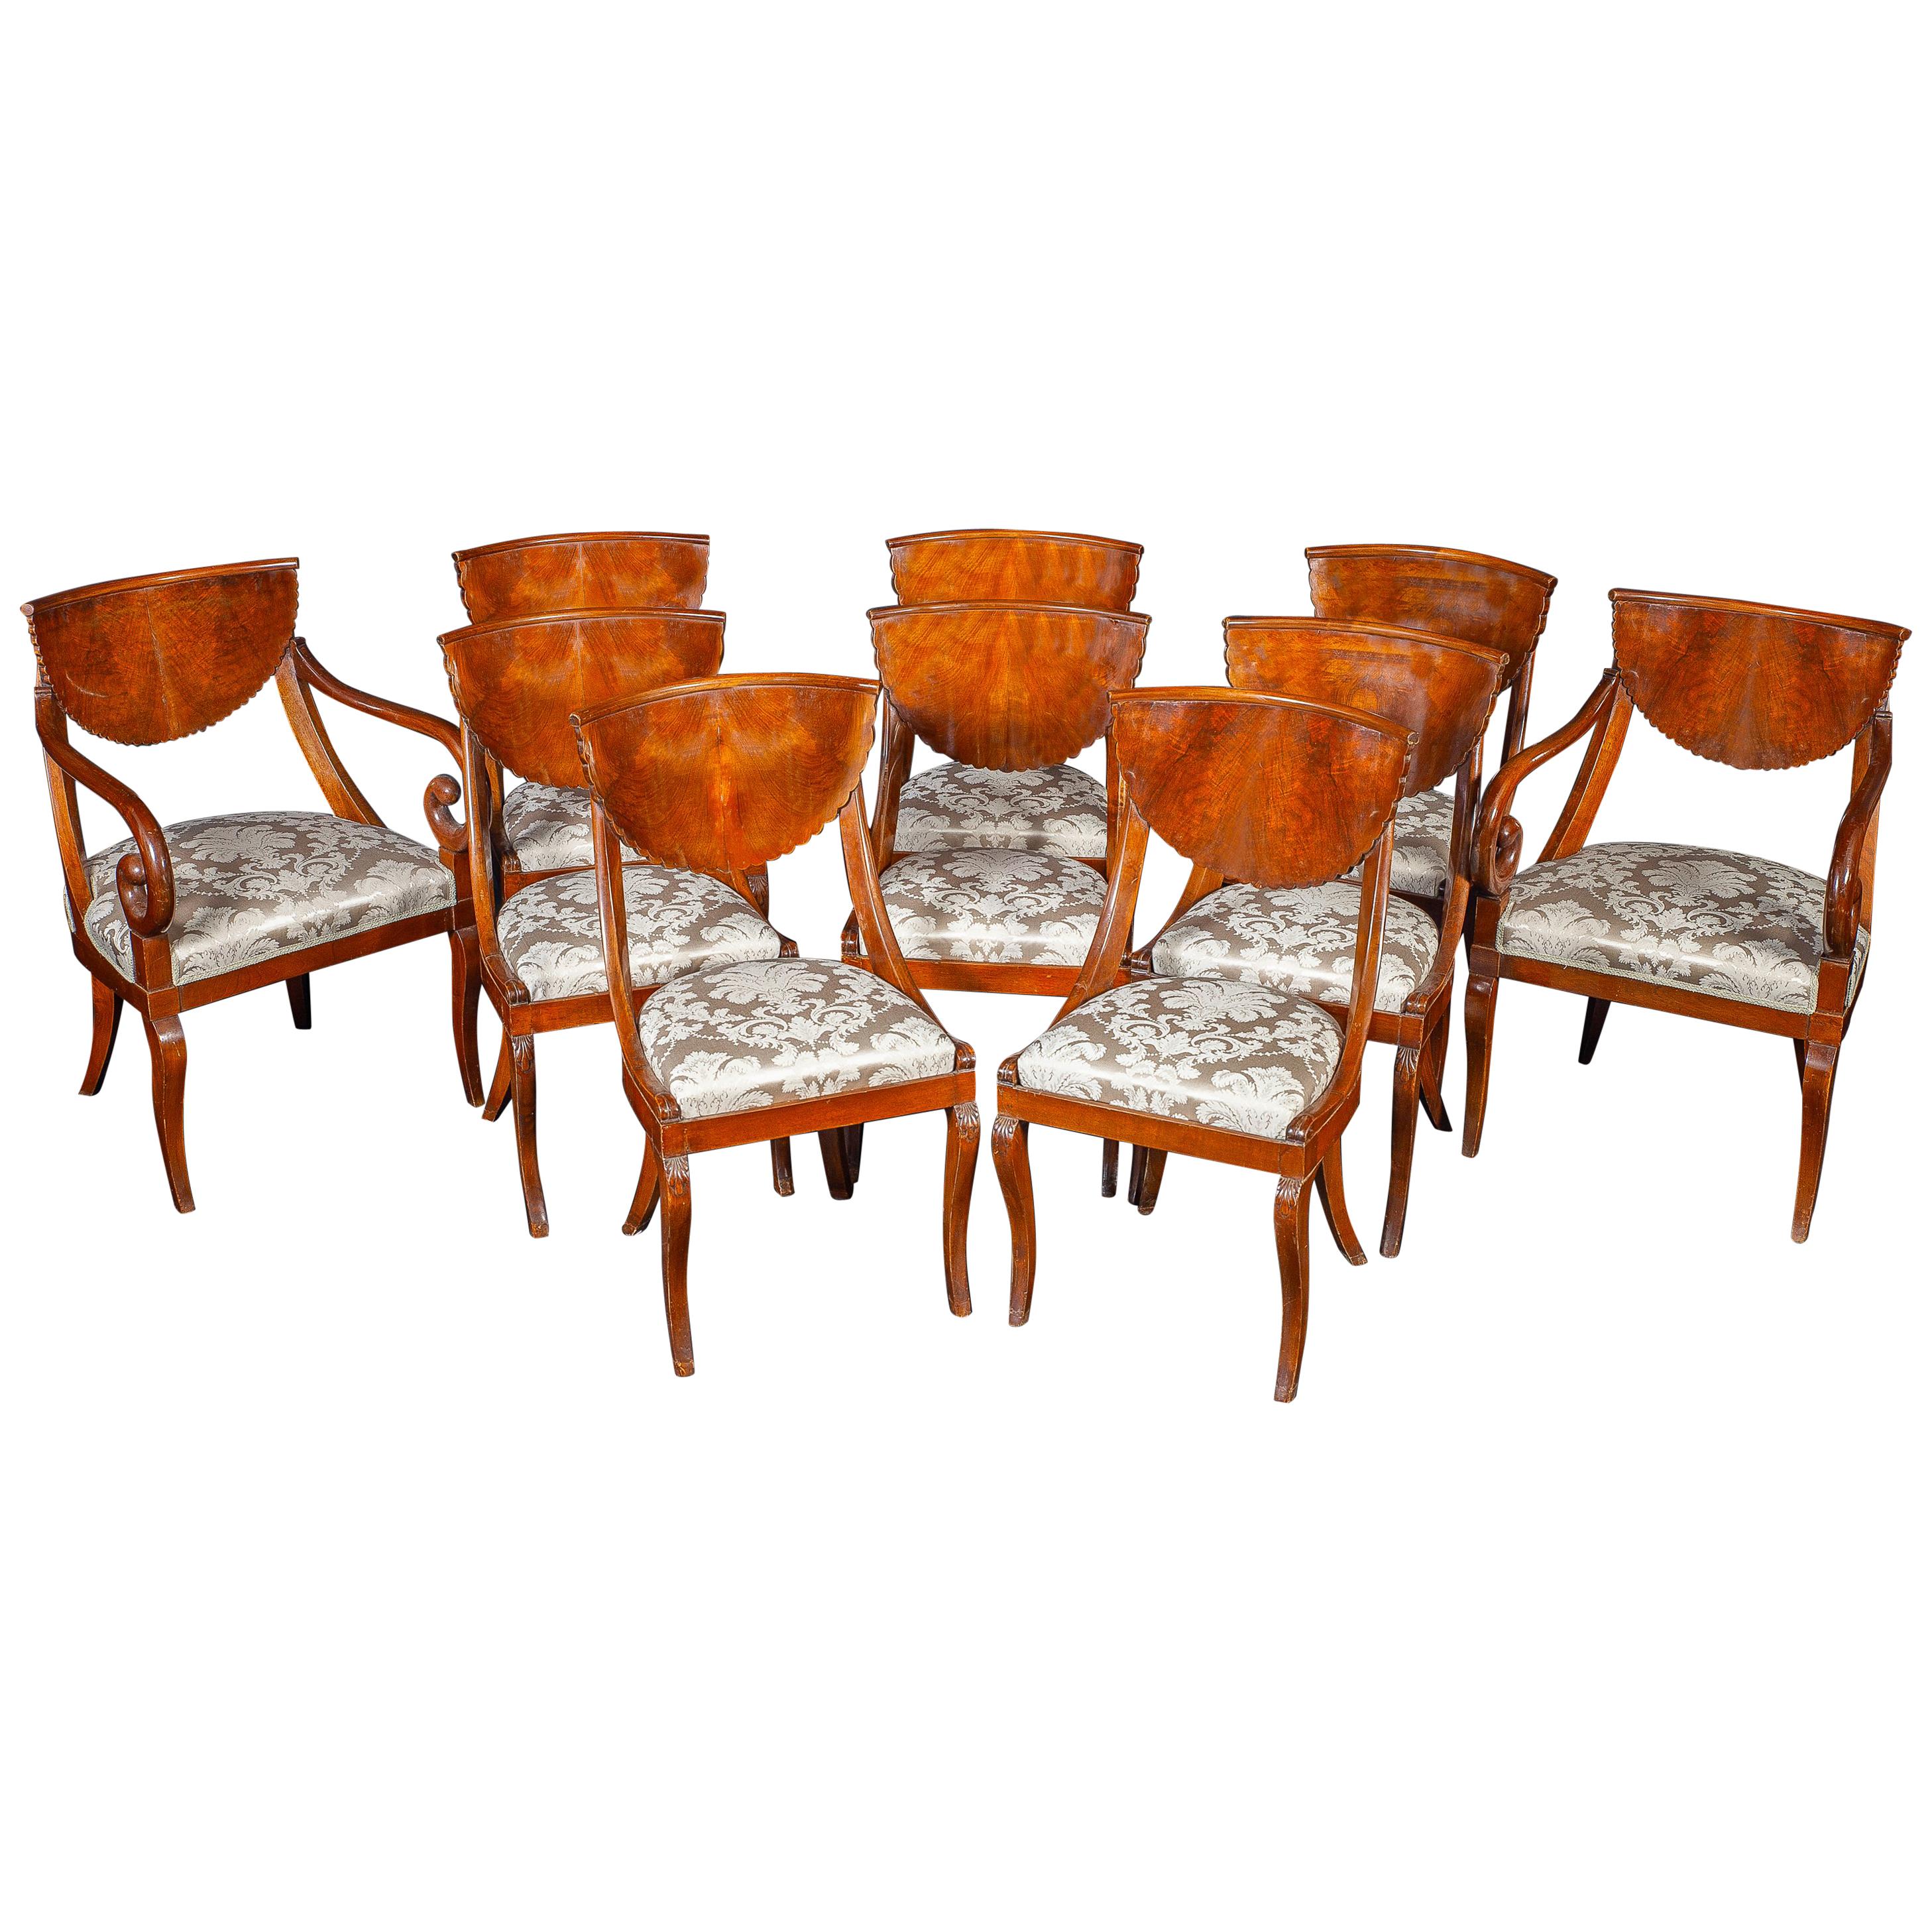 Set of Eight Italian Chairs and a Pair of Armchairs